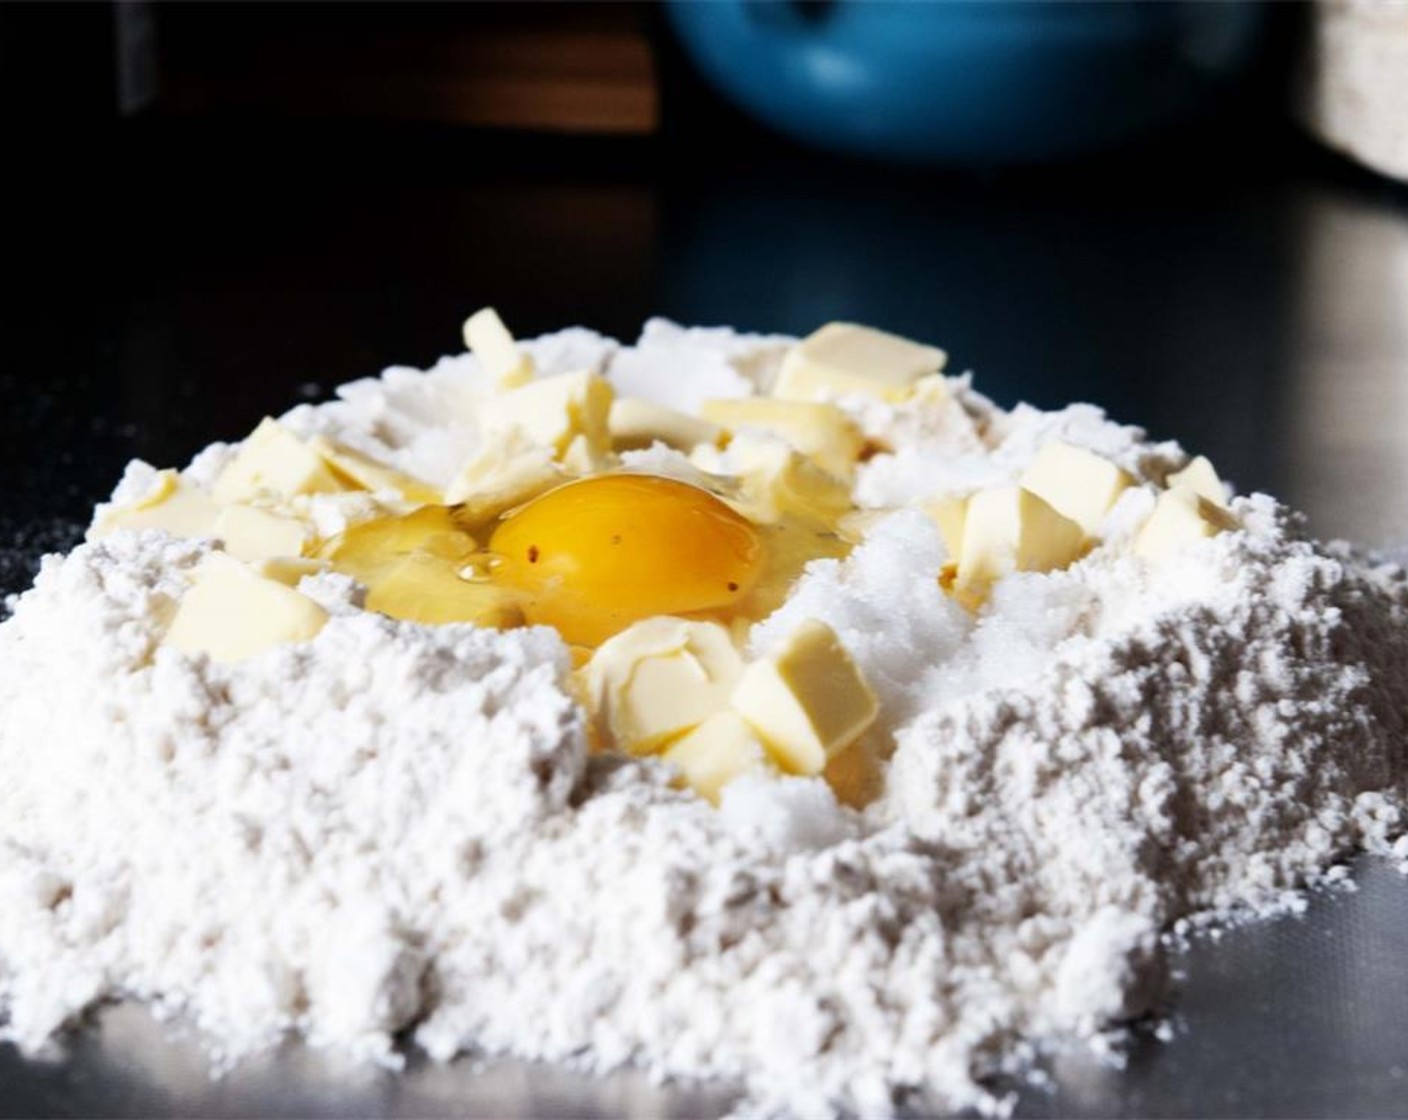 step 6 For the crust, combine All-Purpose Flour (1 cup), Farmhouse Eggs® Large Brown Egg (1), Unsalted Butter (3 1/2 Tbsp). Granulated Sugar (1/4 cup), Baking Powder (1/2 tsp), and 1 tsp of zest from Lemon (1/8) on your kitchen counter.